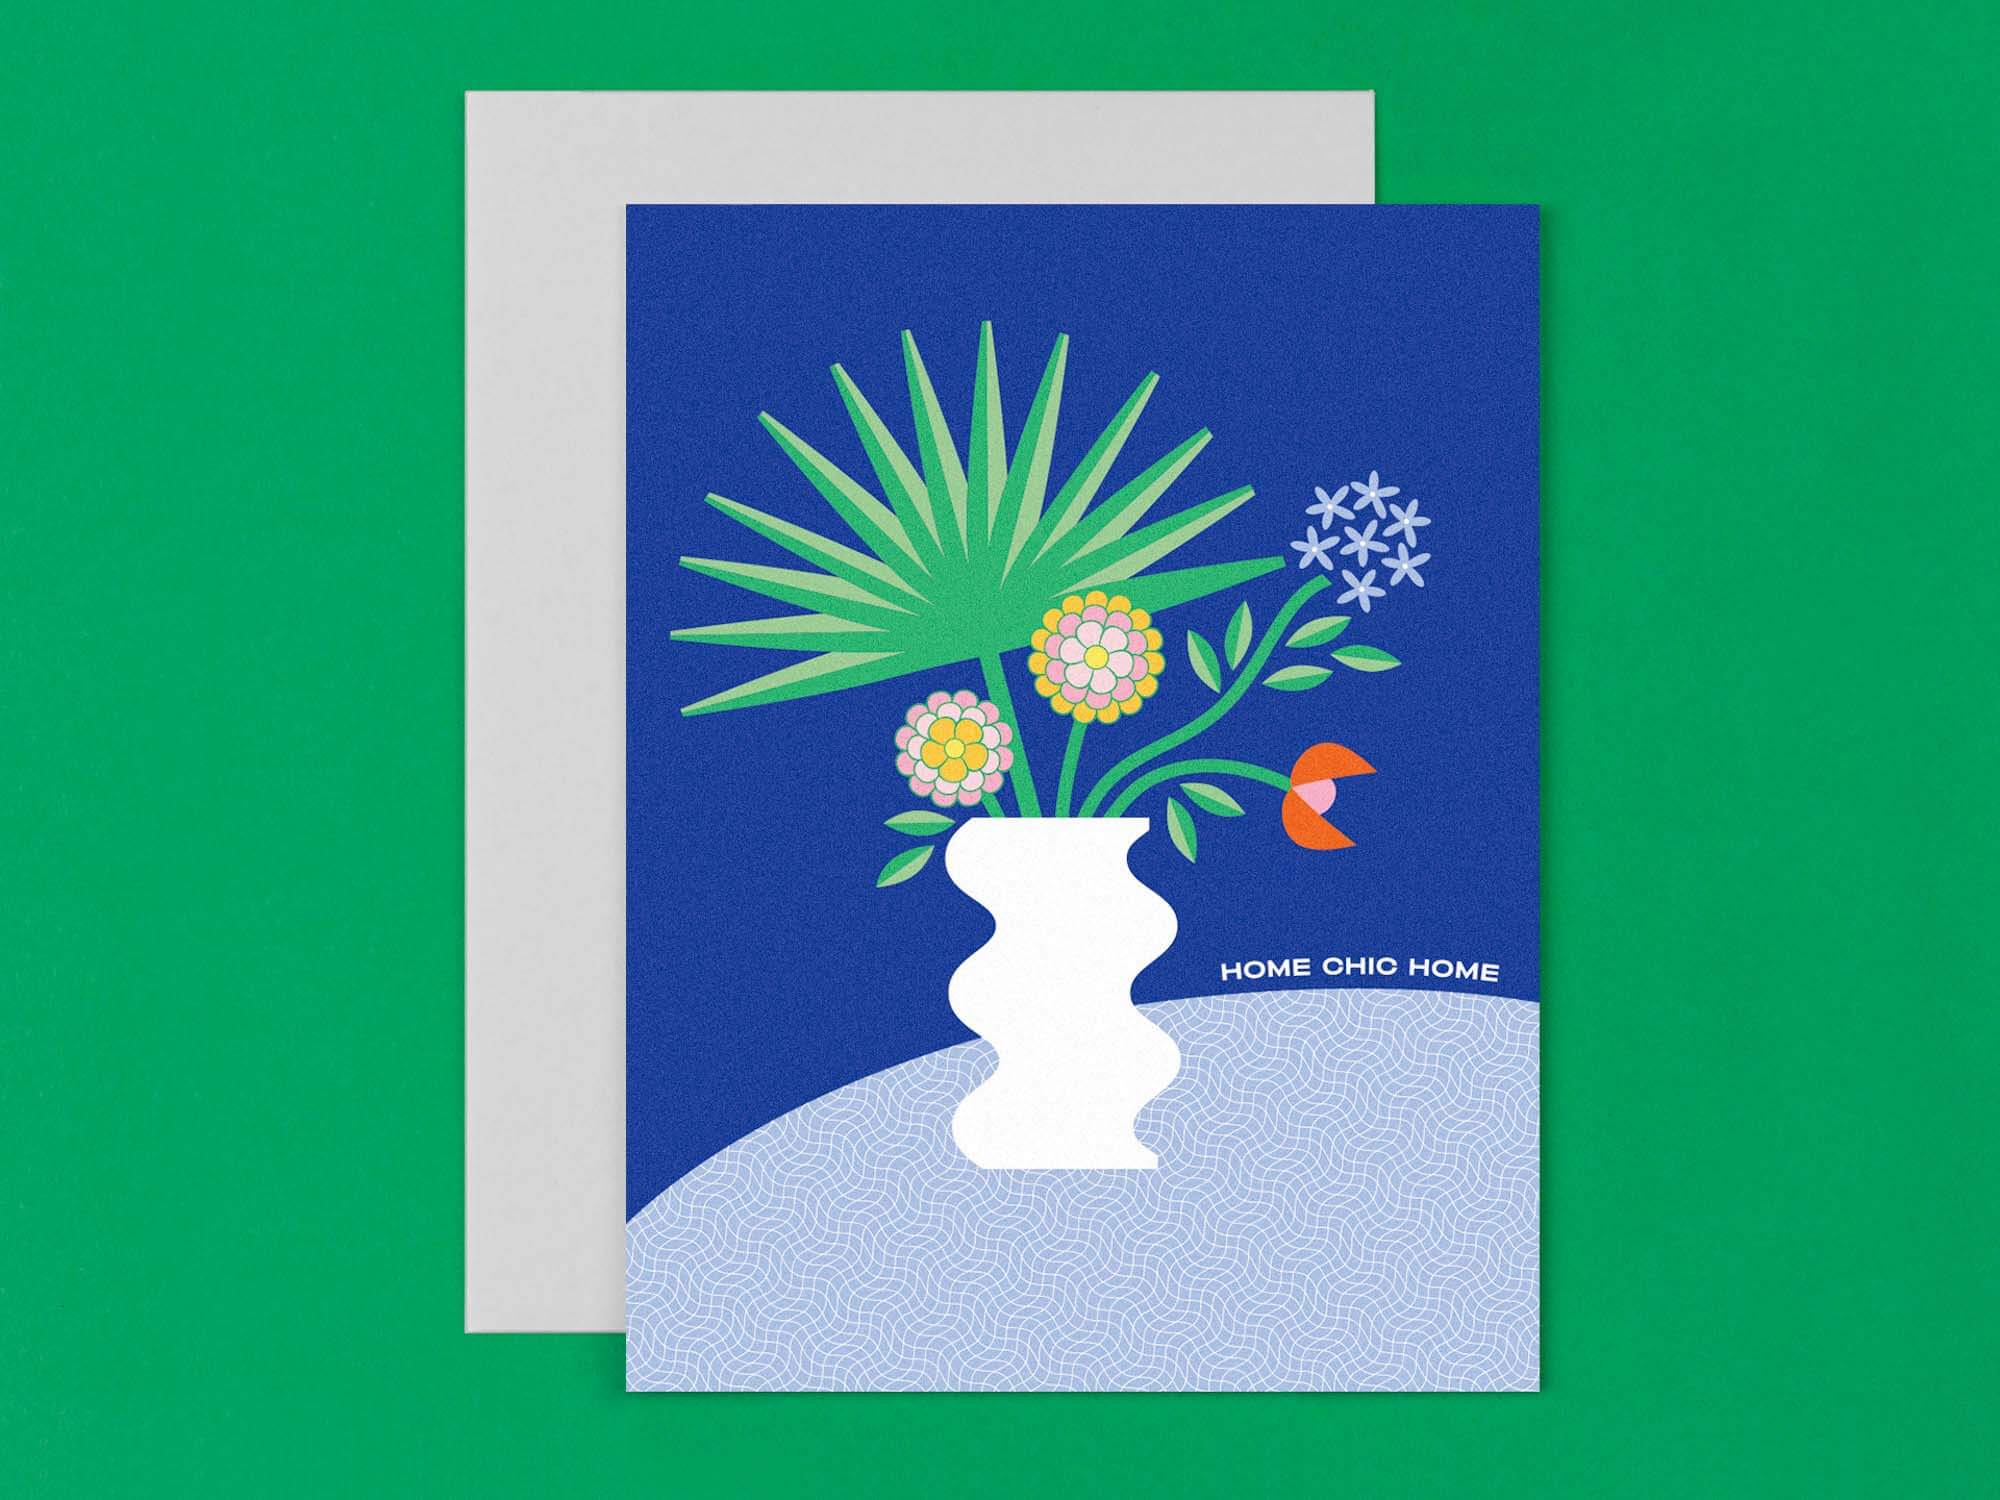 "Home Chic Home" housewarming card for your friends with a new house full of objet d'art and a penchant for Palm Springs. Vaguely Memphis-inspired design with wavy tropical flower vase and wavy grid pattern table. Made in USA by My Darlin' @mydarlin_bk